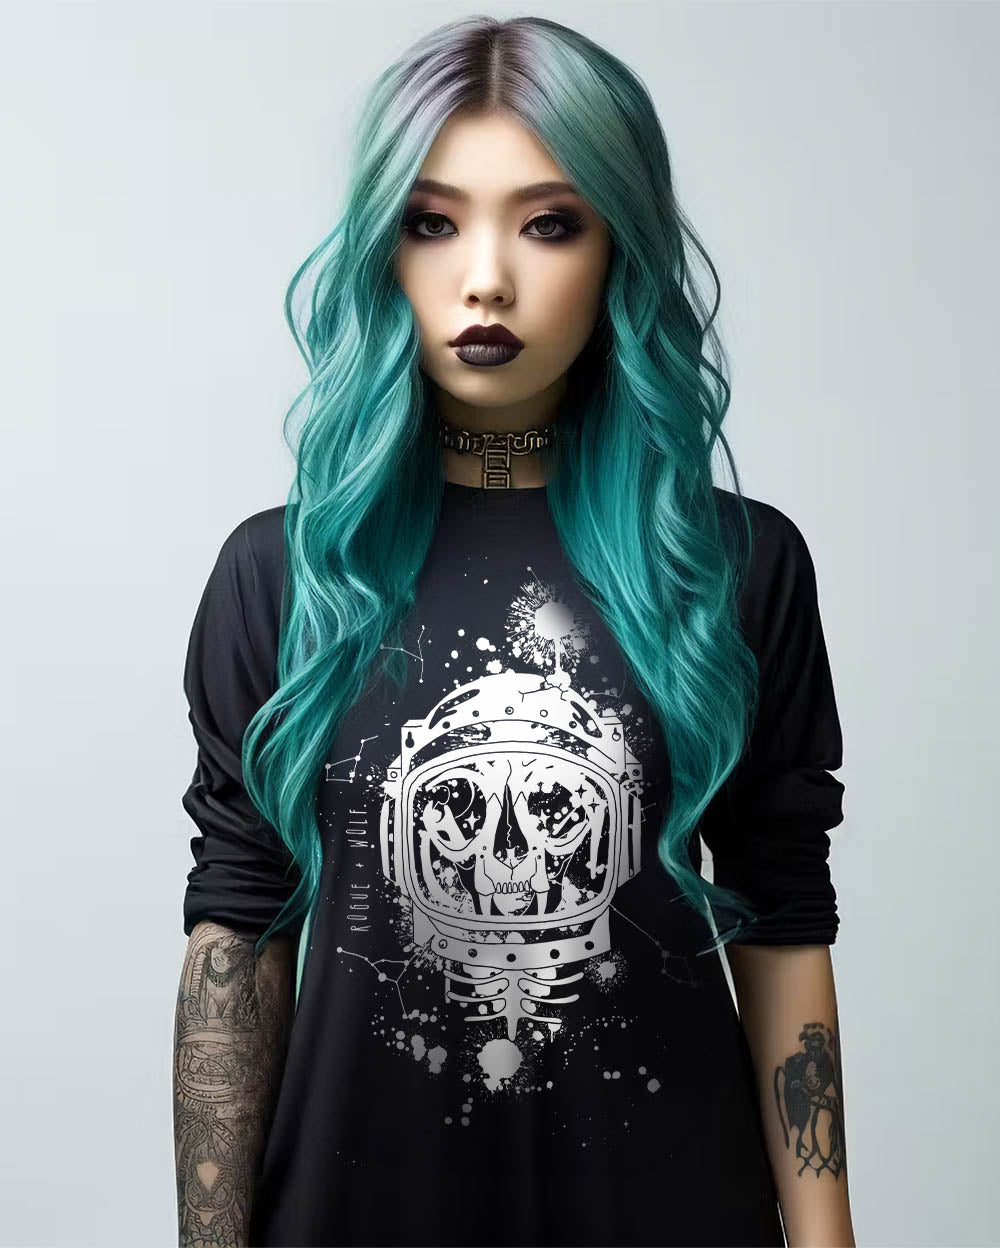 Cat-Astro-Phy Long Sleeve Tee - Unisex & Vegan Alt Goth Cyberpunk Top Grunge Aesthetic Fashion Cool Gothic gifts